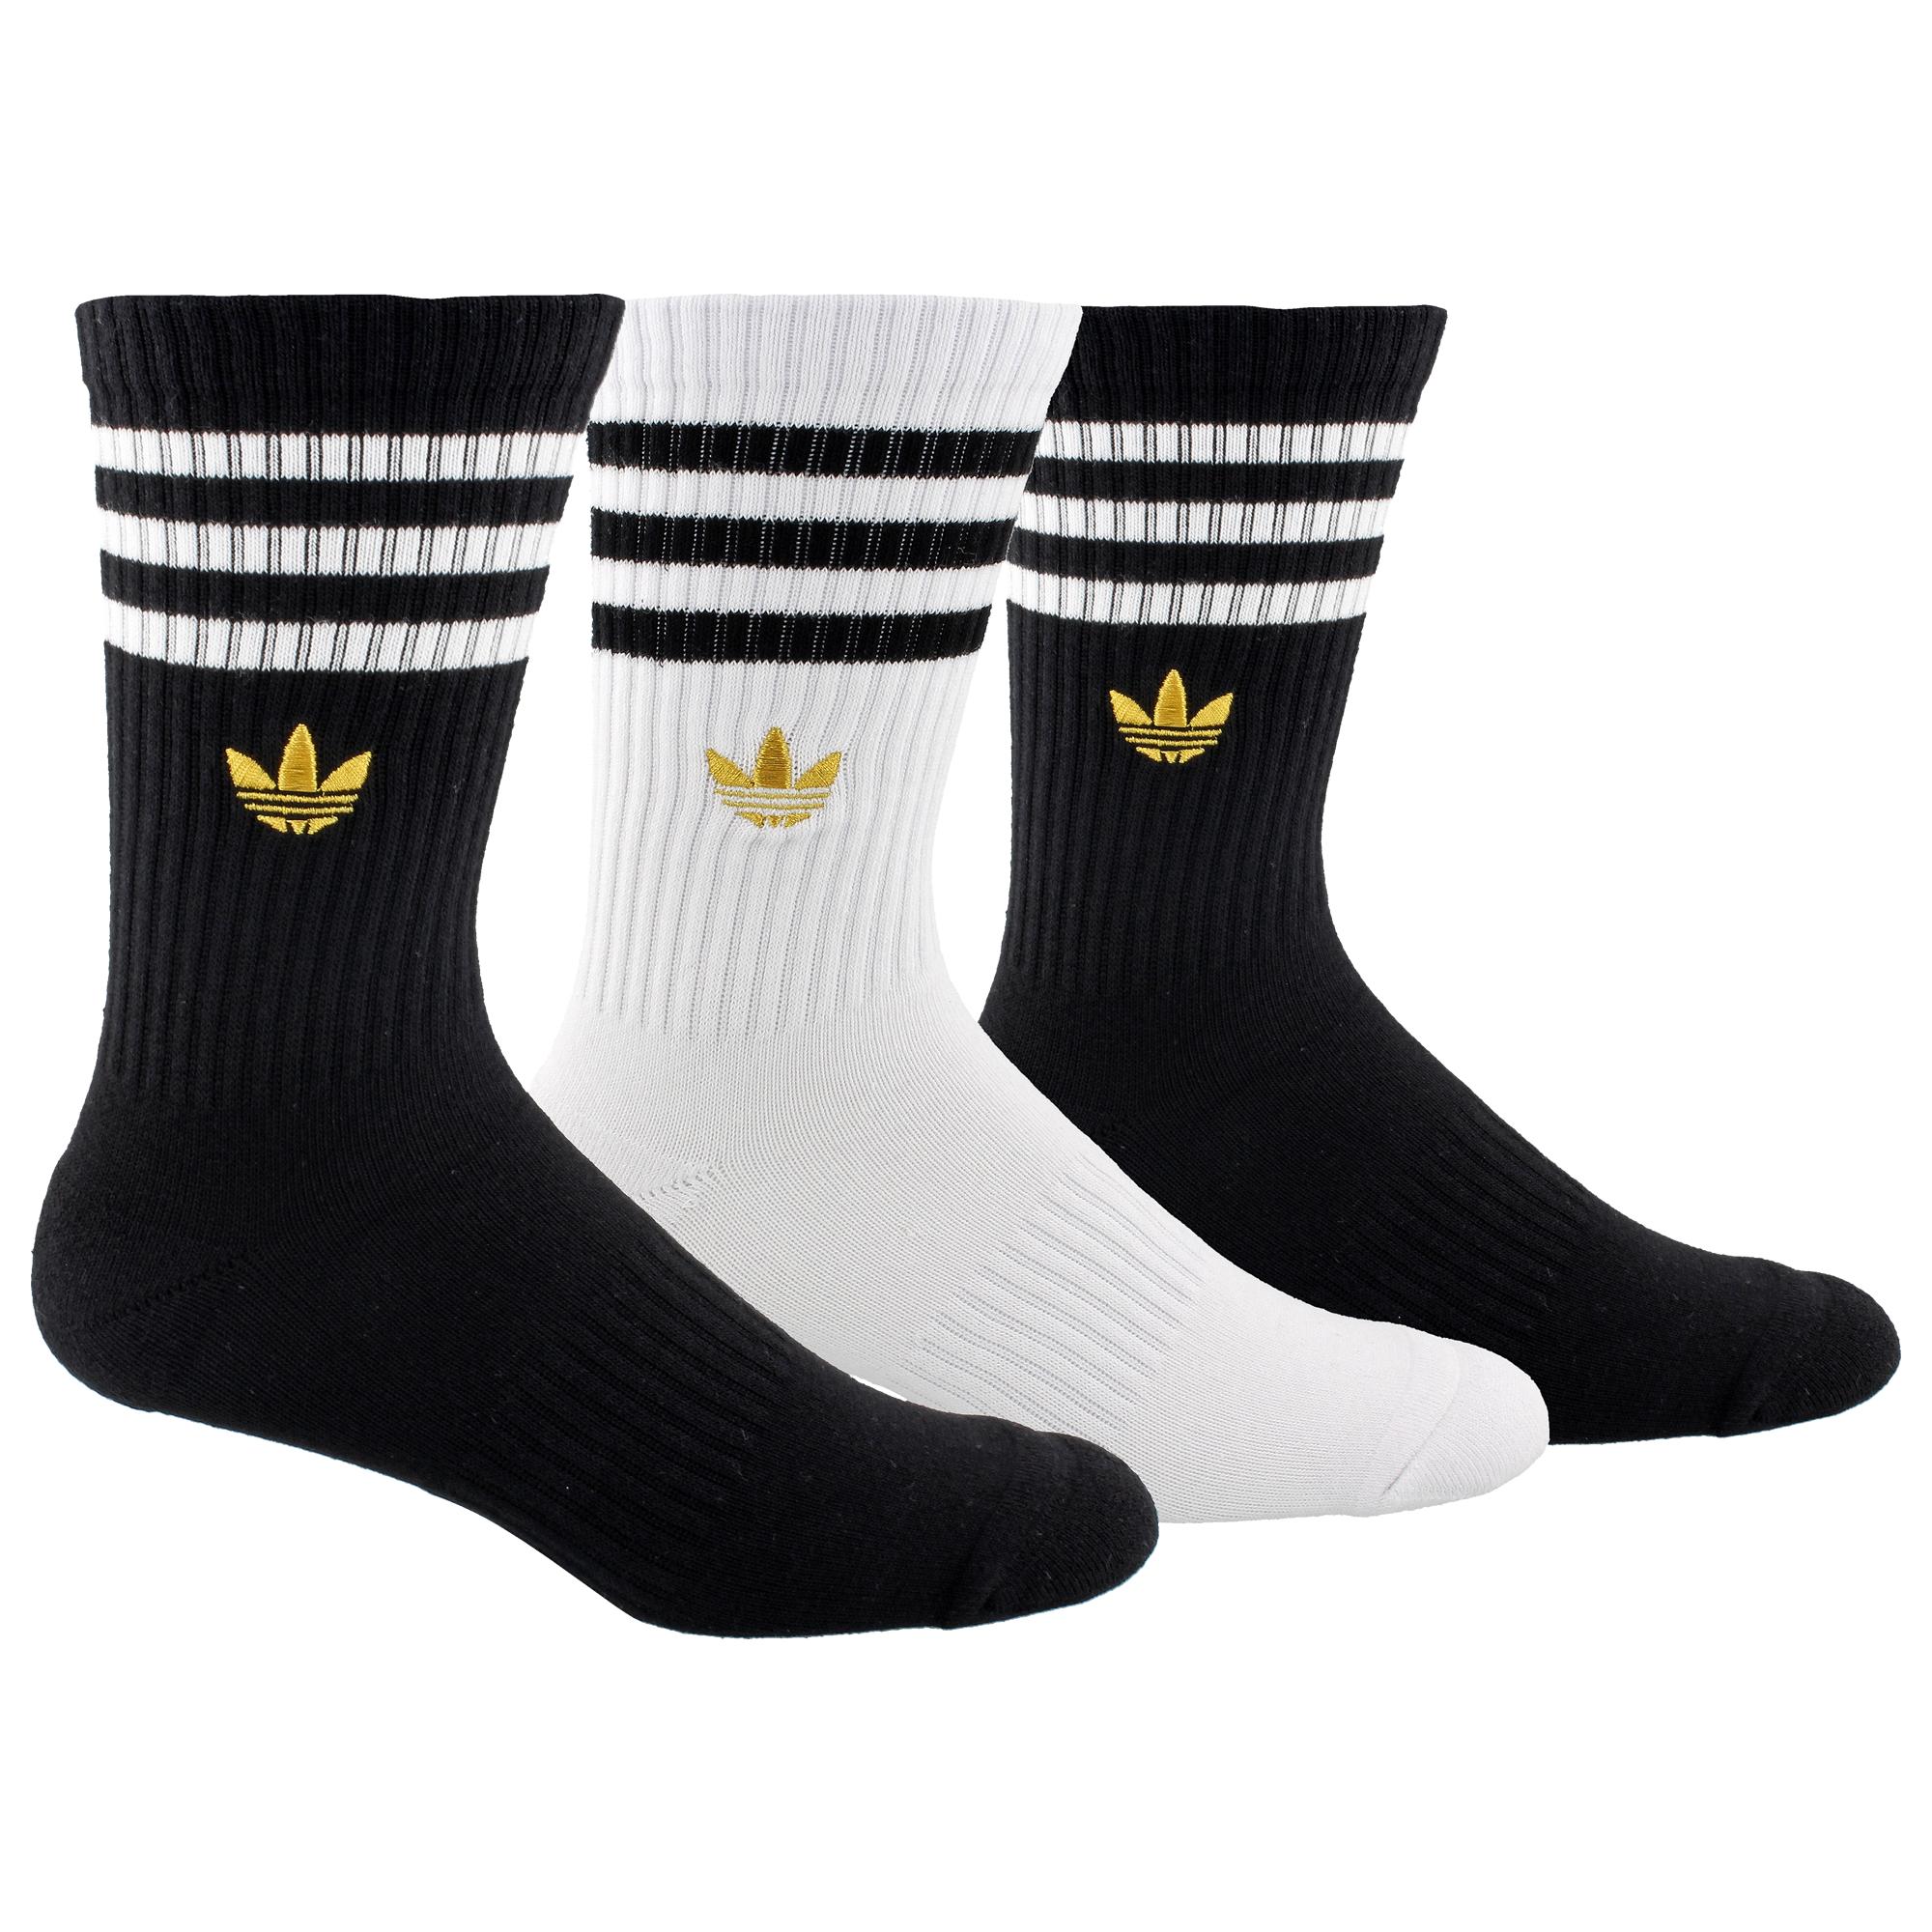 adidas Originals Synthetic 3 Stripe Embroidered 3 Pack Crew Socks in  Black/Gold (Black) for Men - Lyst